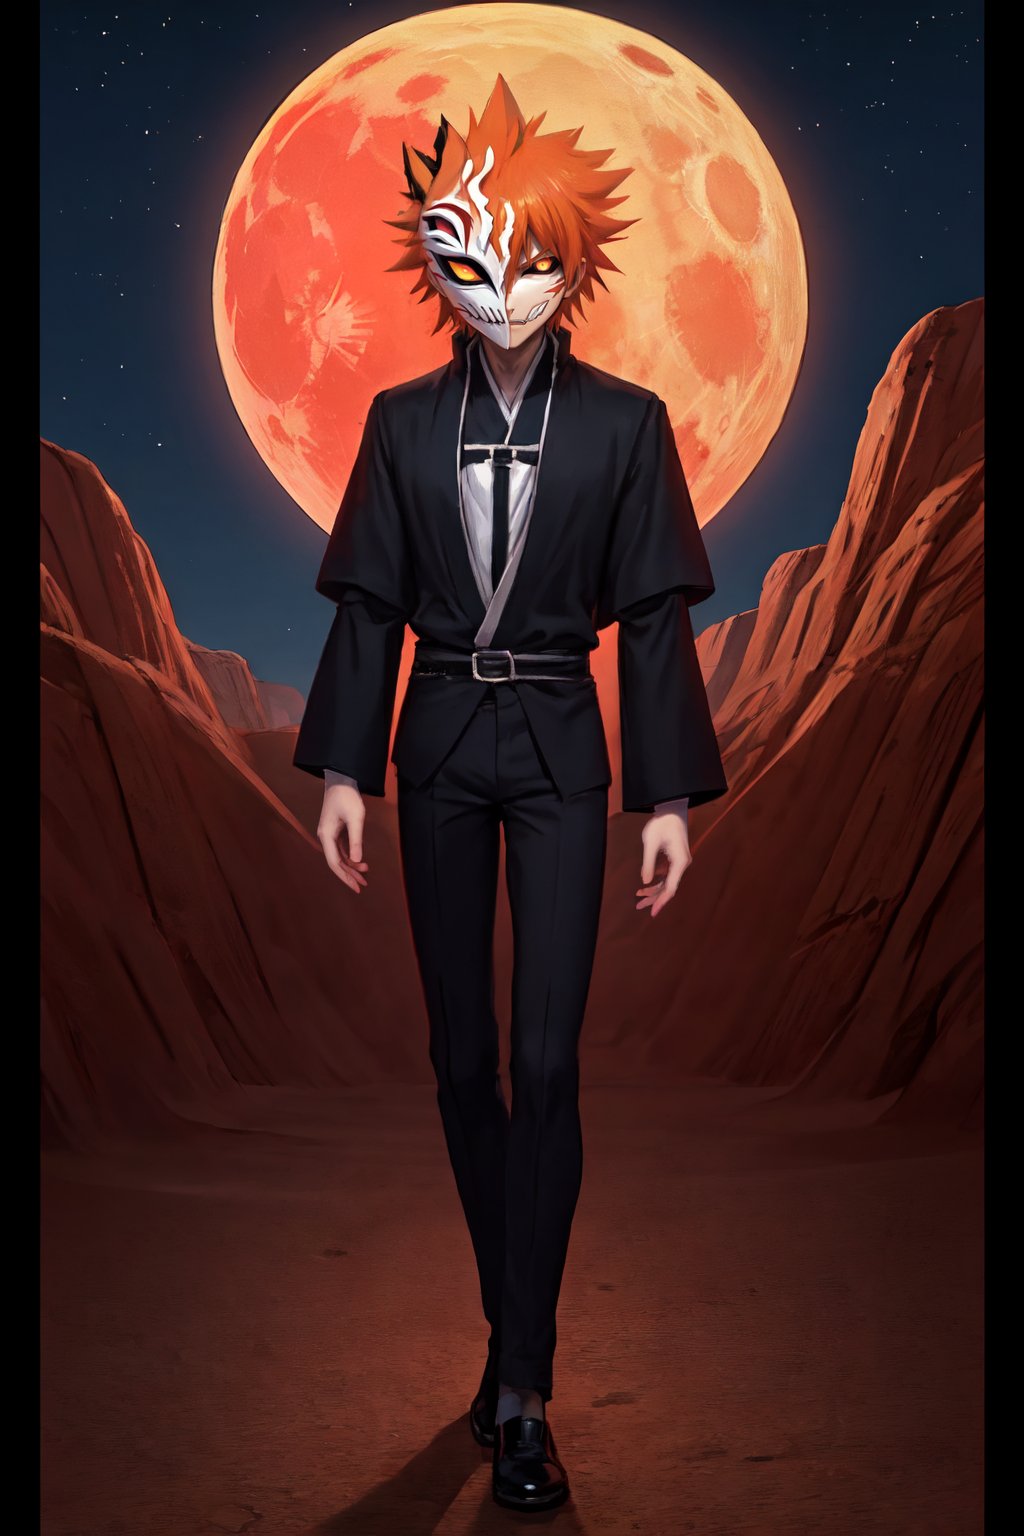 hollow mask ichigo, colored sclera, black sclera, orange hair, looking at viewer, spiked hair, male focus, solo, full body, desert, night time, yellow moon, abstract art


